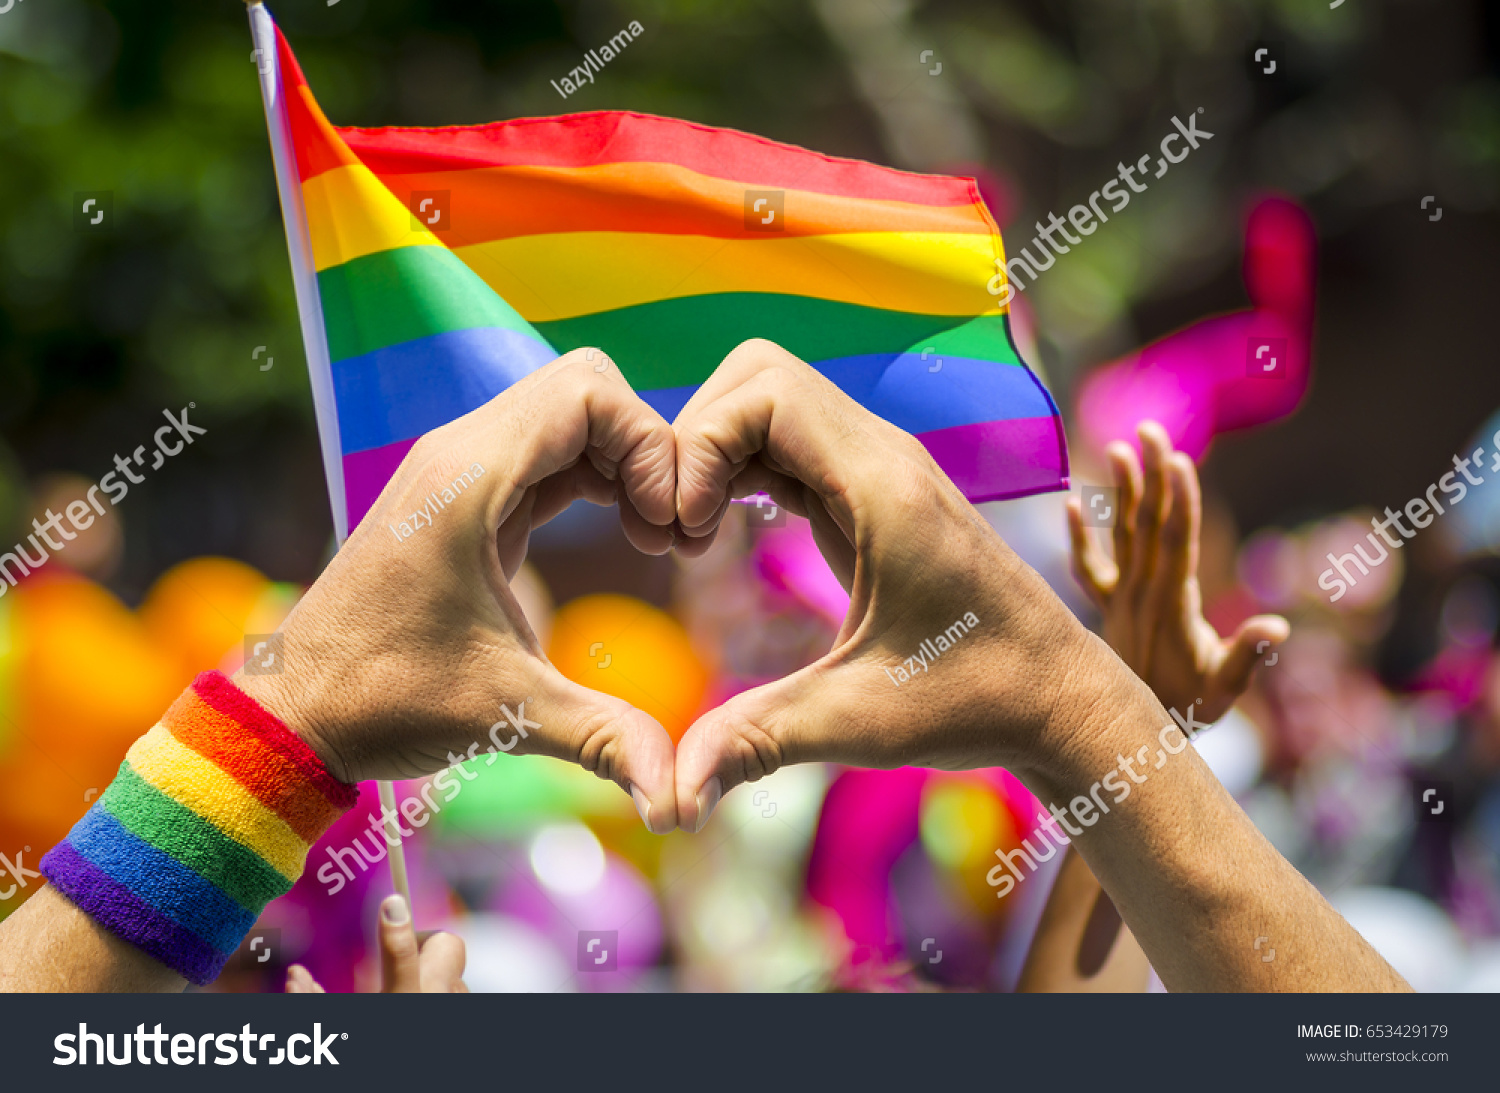 Supporting hands make heart sign and wave in front of a rainbow flag flying on the sidelines of a summer gay pride parade #653429179